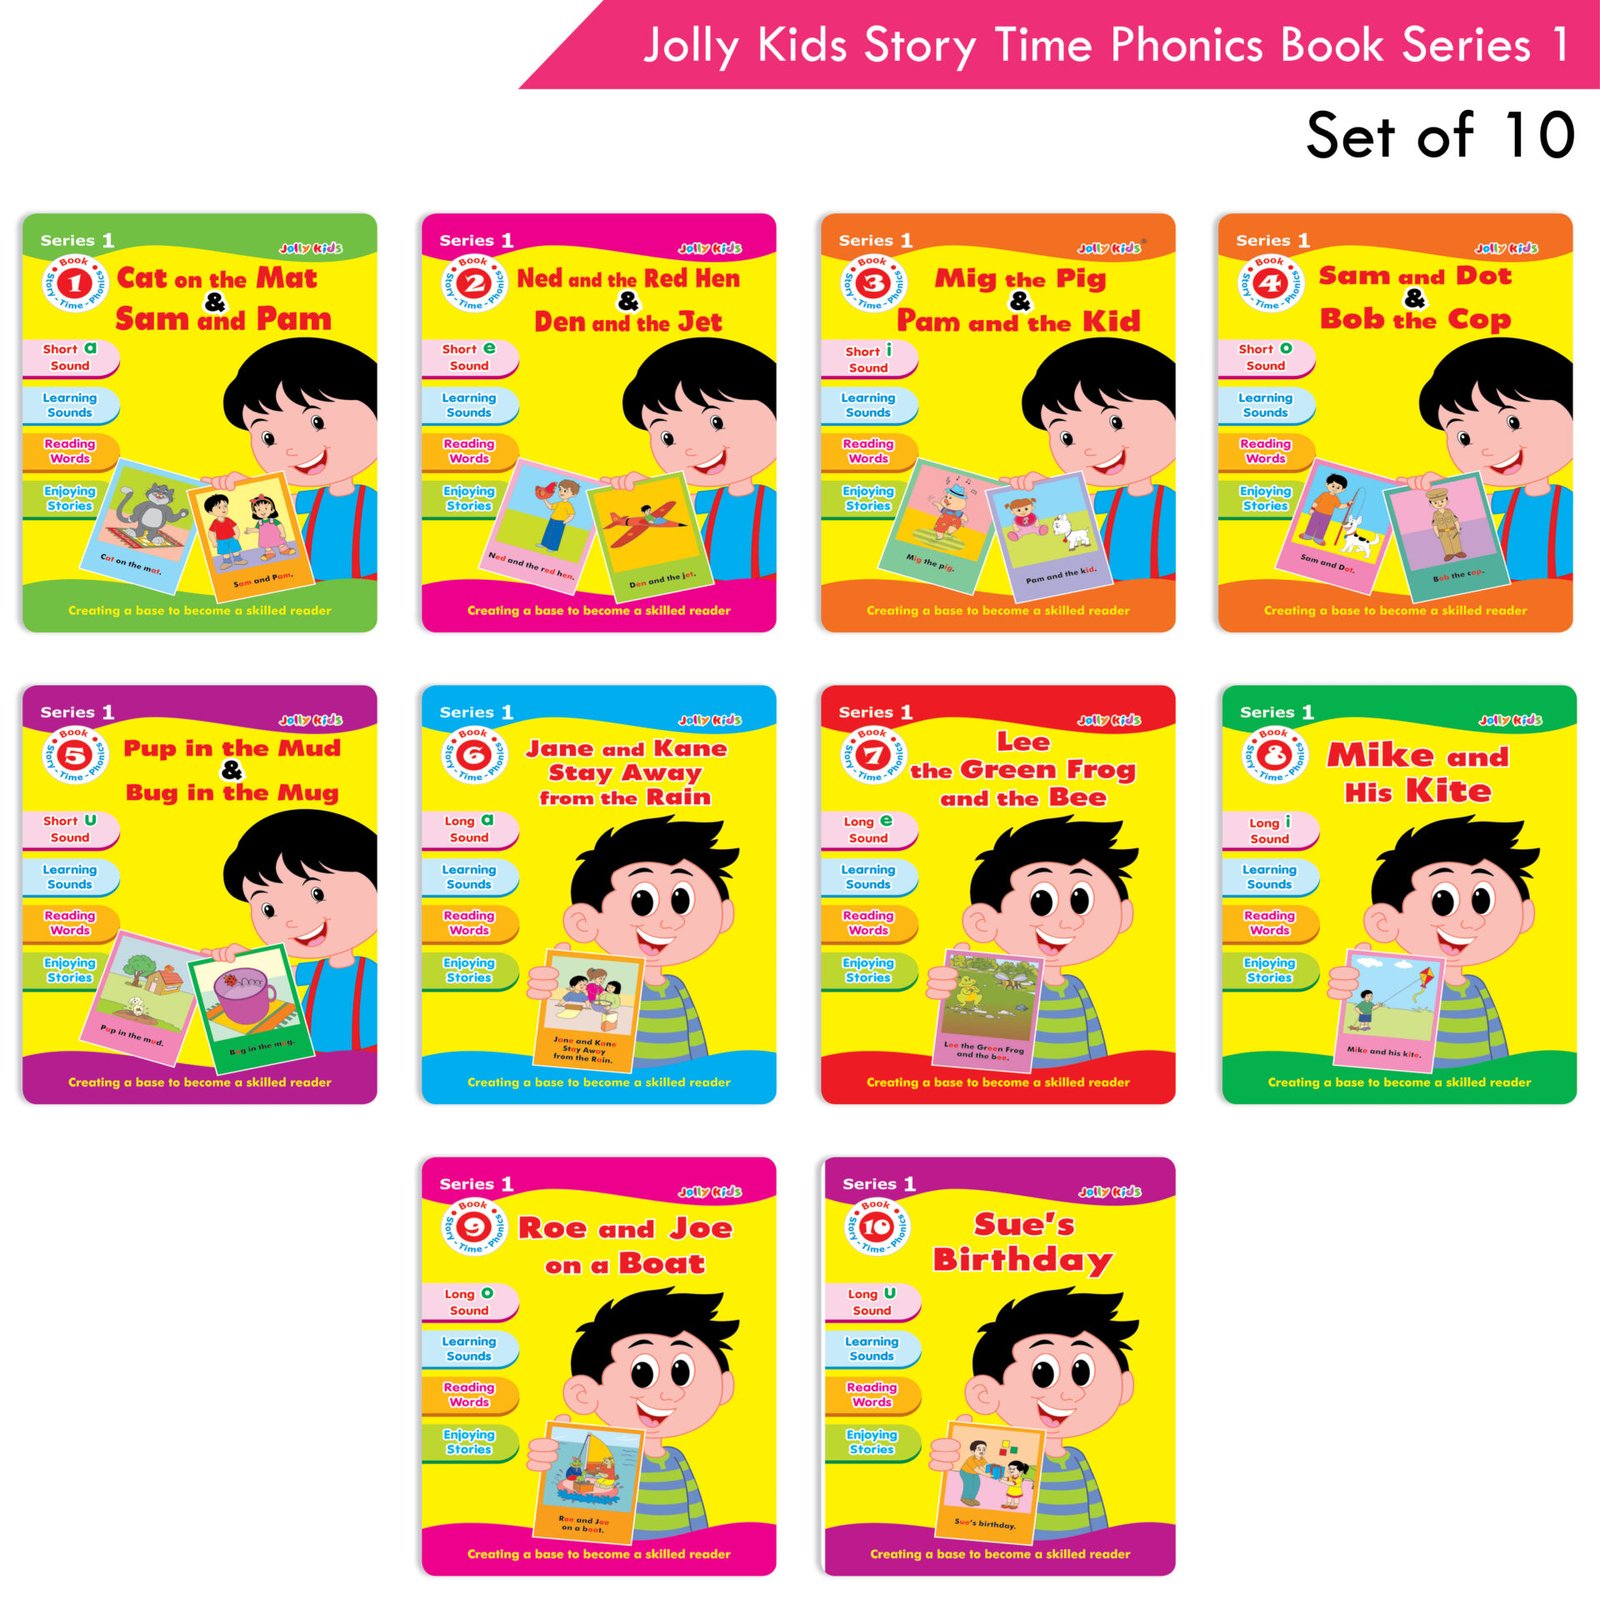 Jolly Kids Story Time Phonics Book Series 1 Set of 10 1